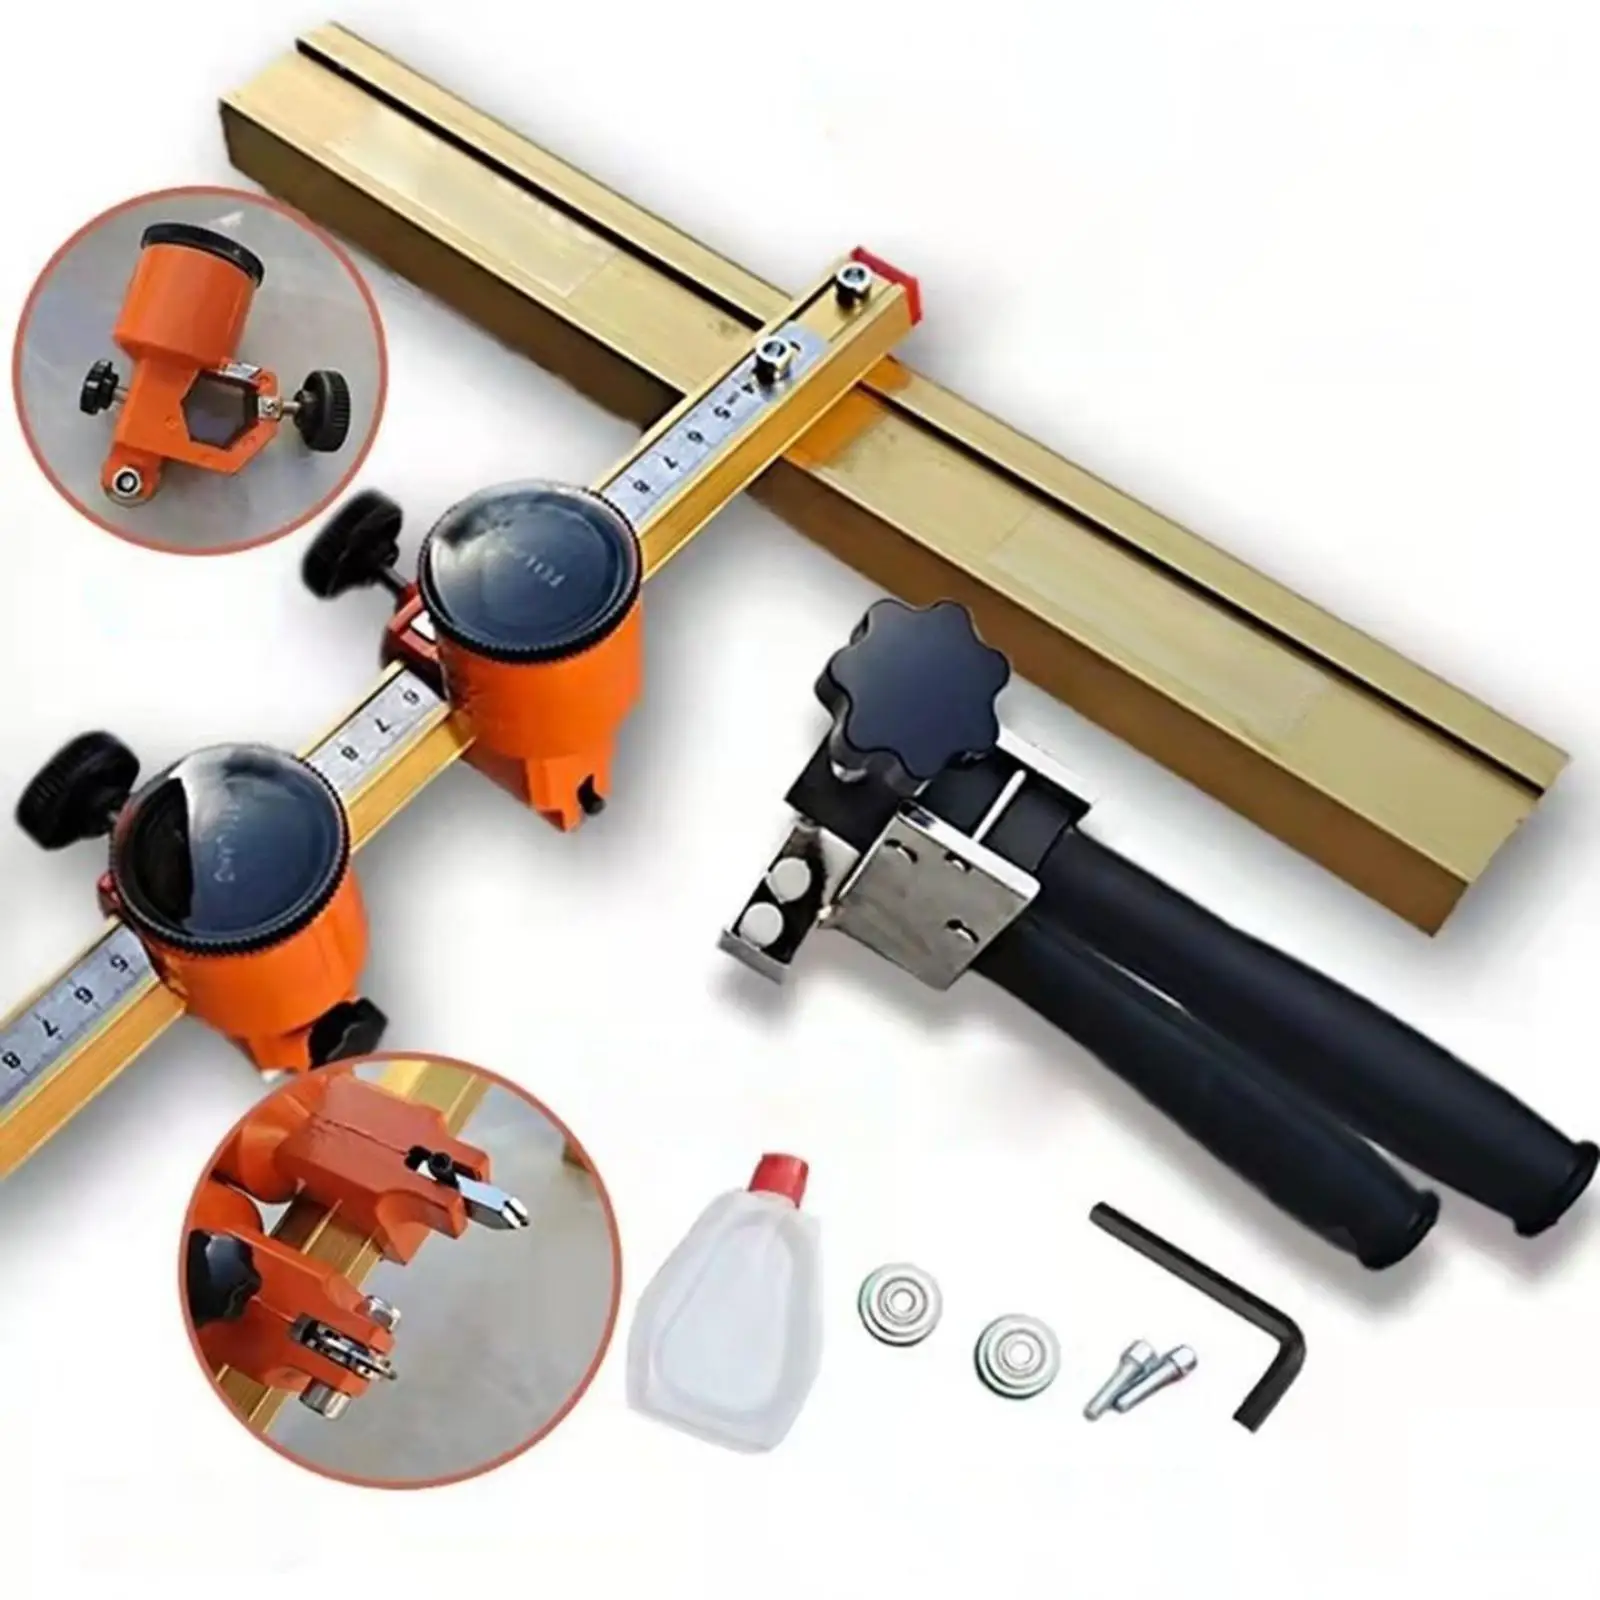 Glass Cutter Strong Glass Tile Cutter Portable with Automatic Oil feed DIY Project Hand Tool Accessories for Mirrors Floor Tile